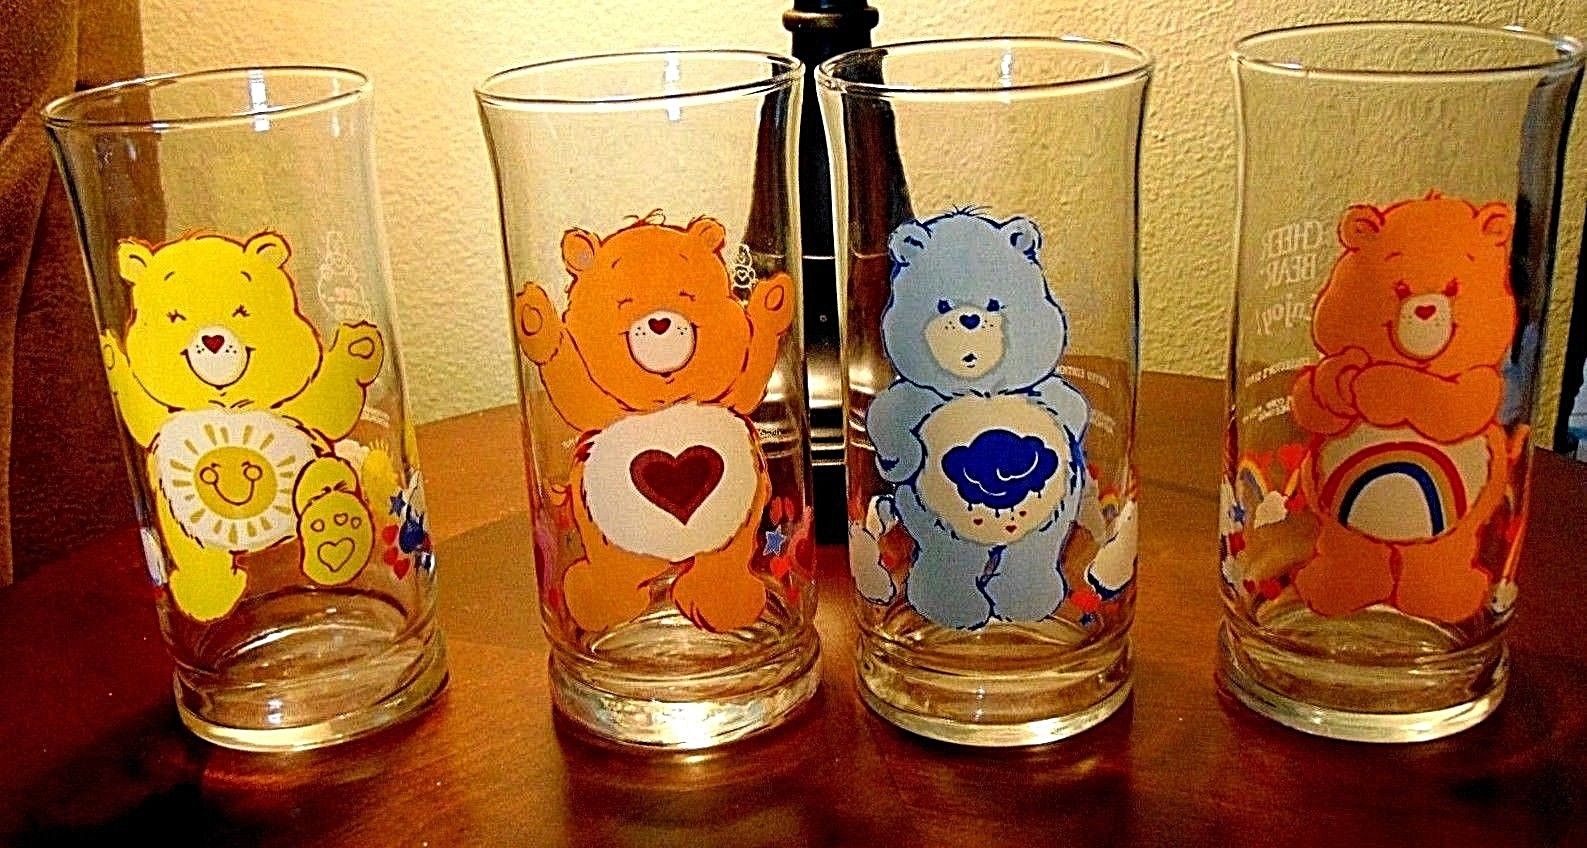 VINTAGE 1983 SET OF 4 CARE BEAR GLASSES TUMBLERS  LIBBY GLASS CO. PIZZA HUT 